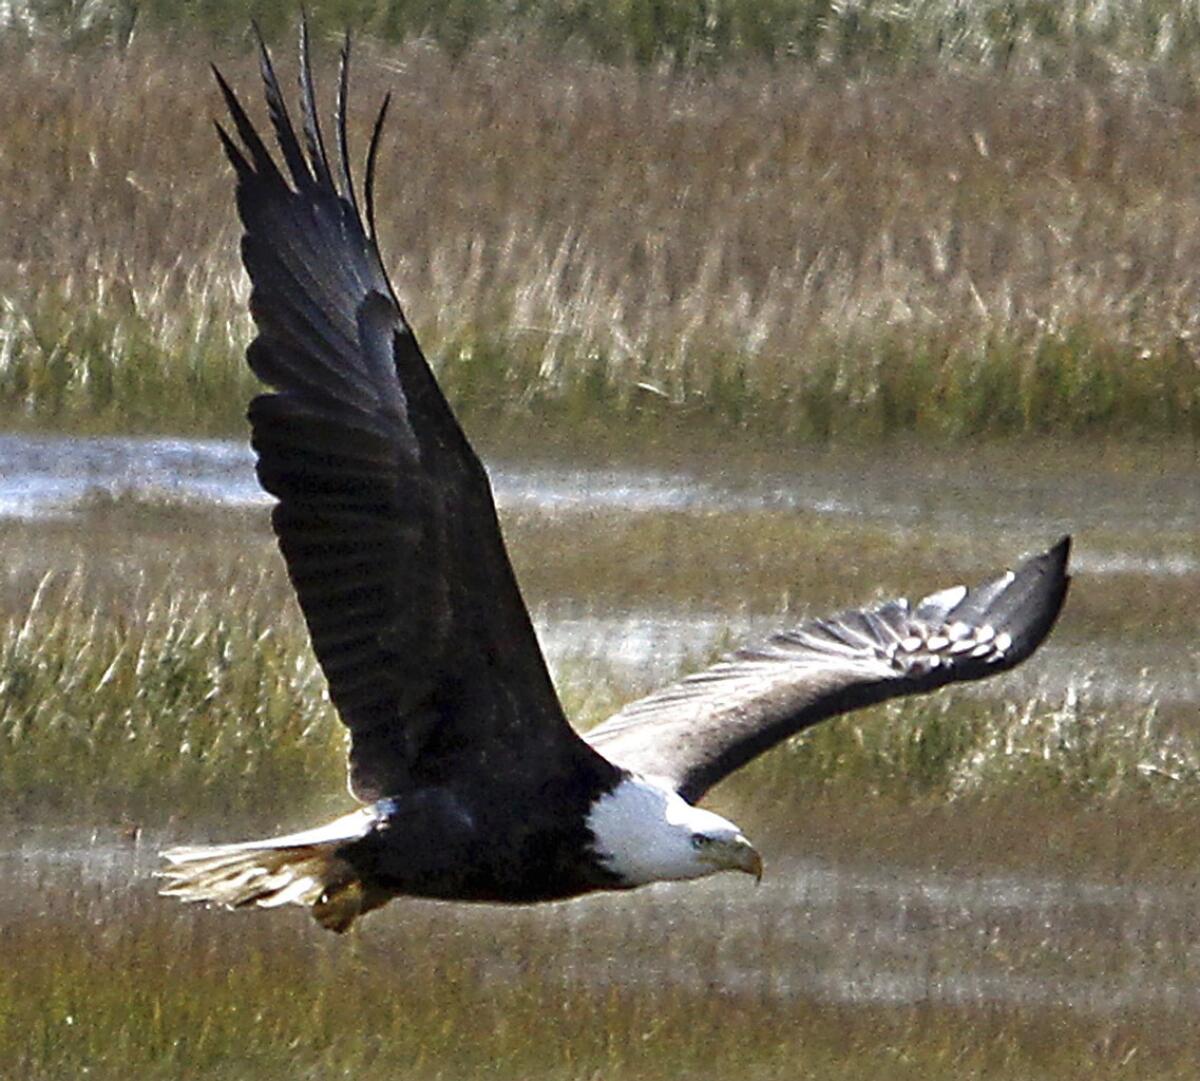 FILE - In this Nov. 1, 2011 file photo, a bald eagle soars over the marshes off North Wildwood Boulevard in the Grassy Sound section of Middle Township, N.J. (Dale Gerhard/The Press of Atlantic City via AP, file)